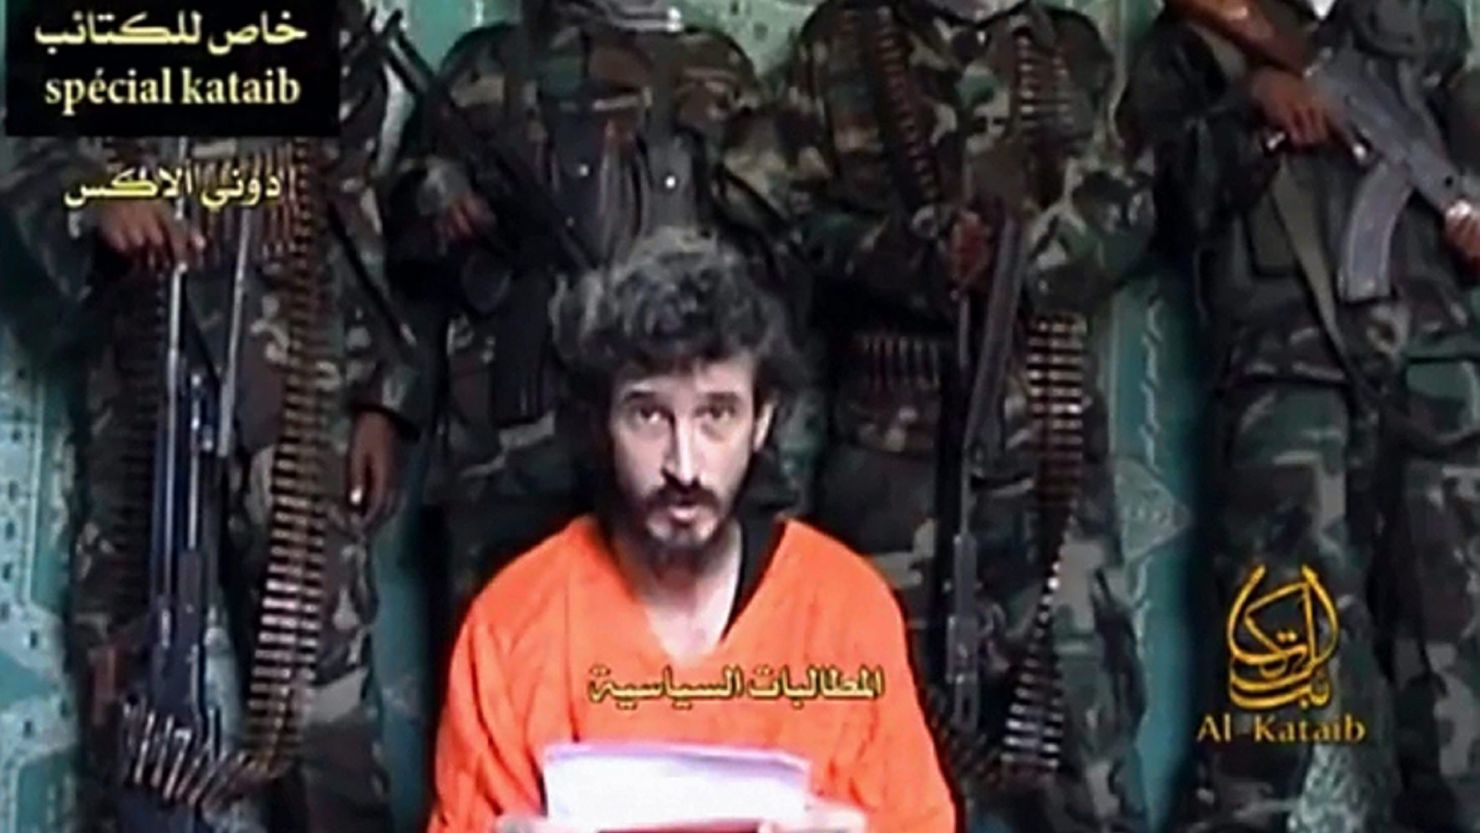 TV grab of footage shows Denis Allex, a French hostage allegedly held by Somali militants, 12 January 2013.